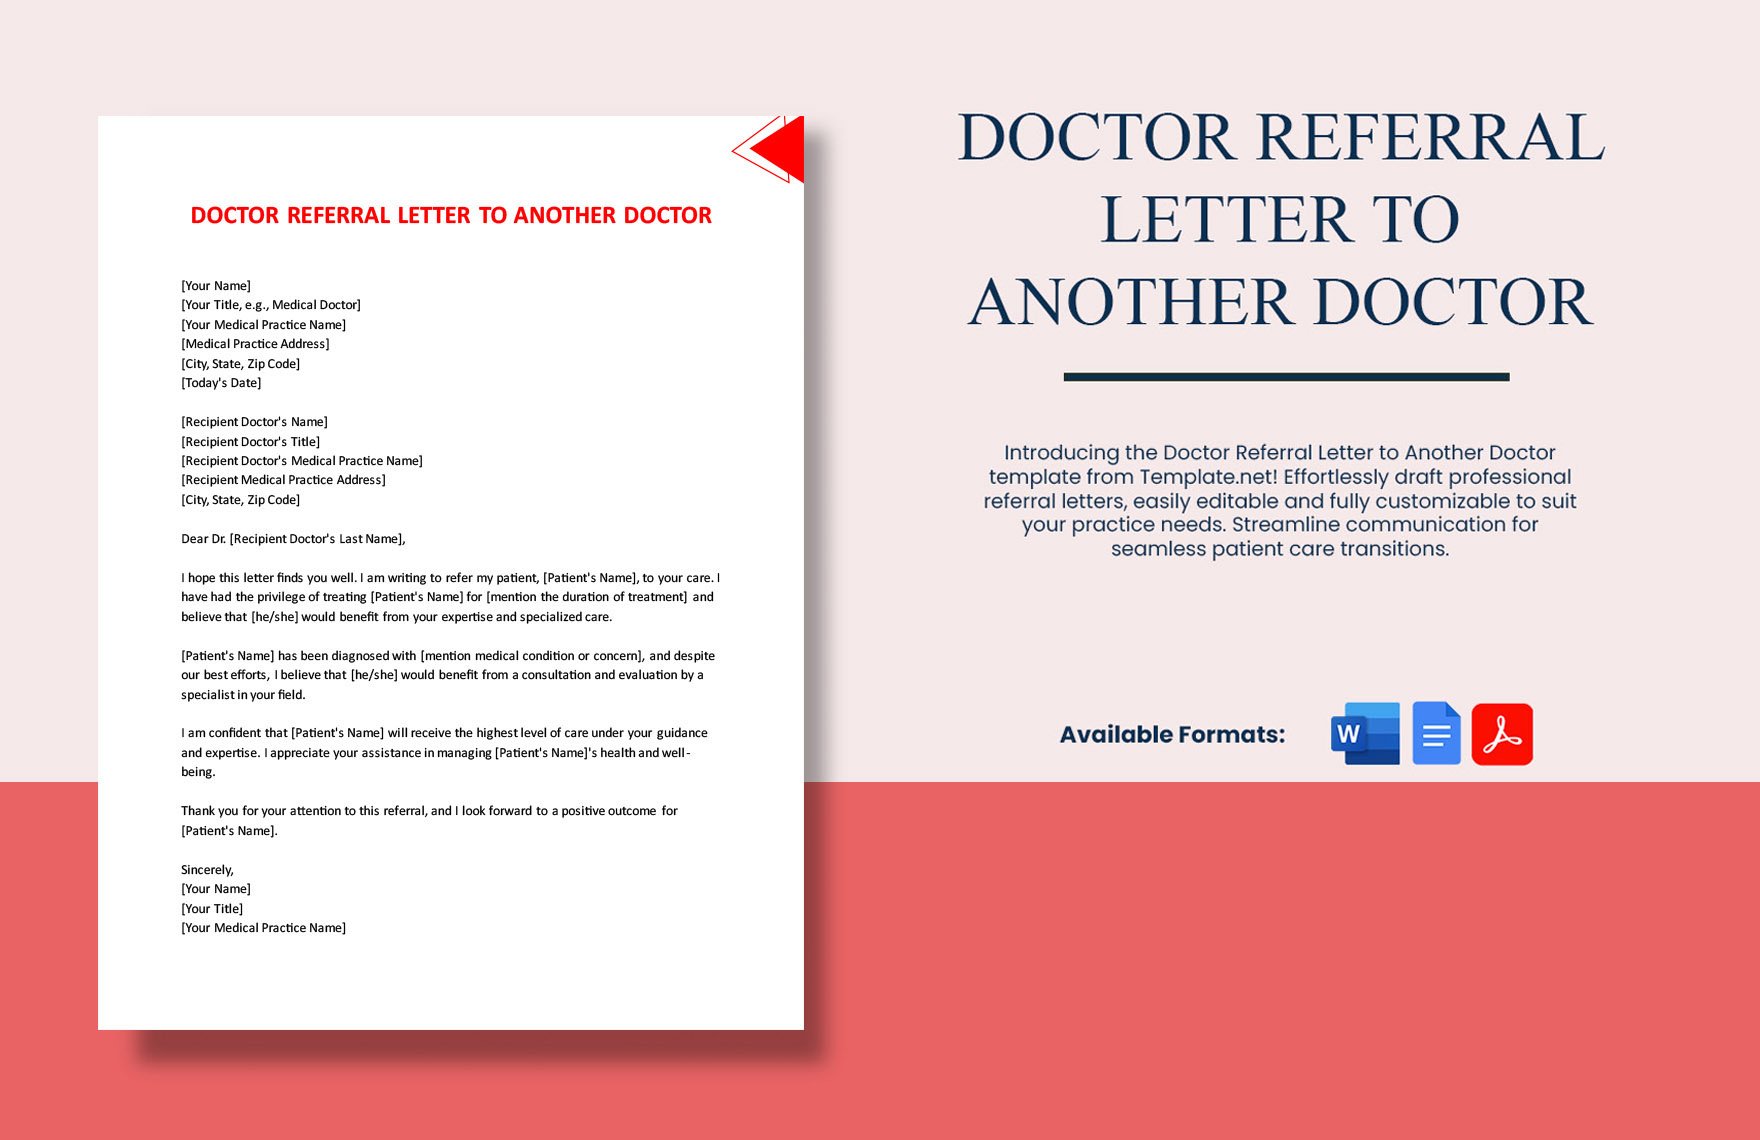 Doctor Referral Letter To Another Doctor in Word, Google Docs, PDF